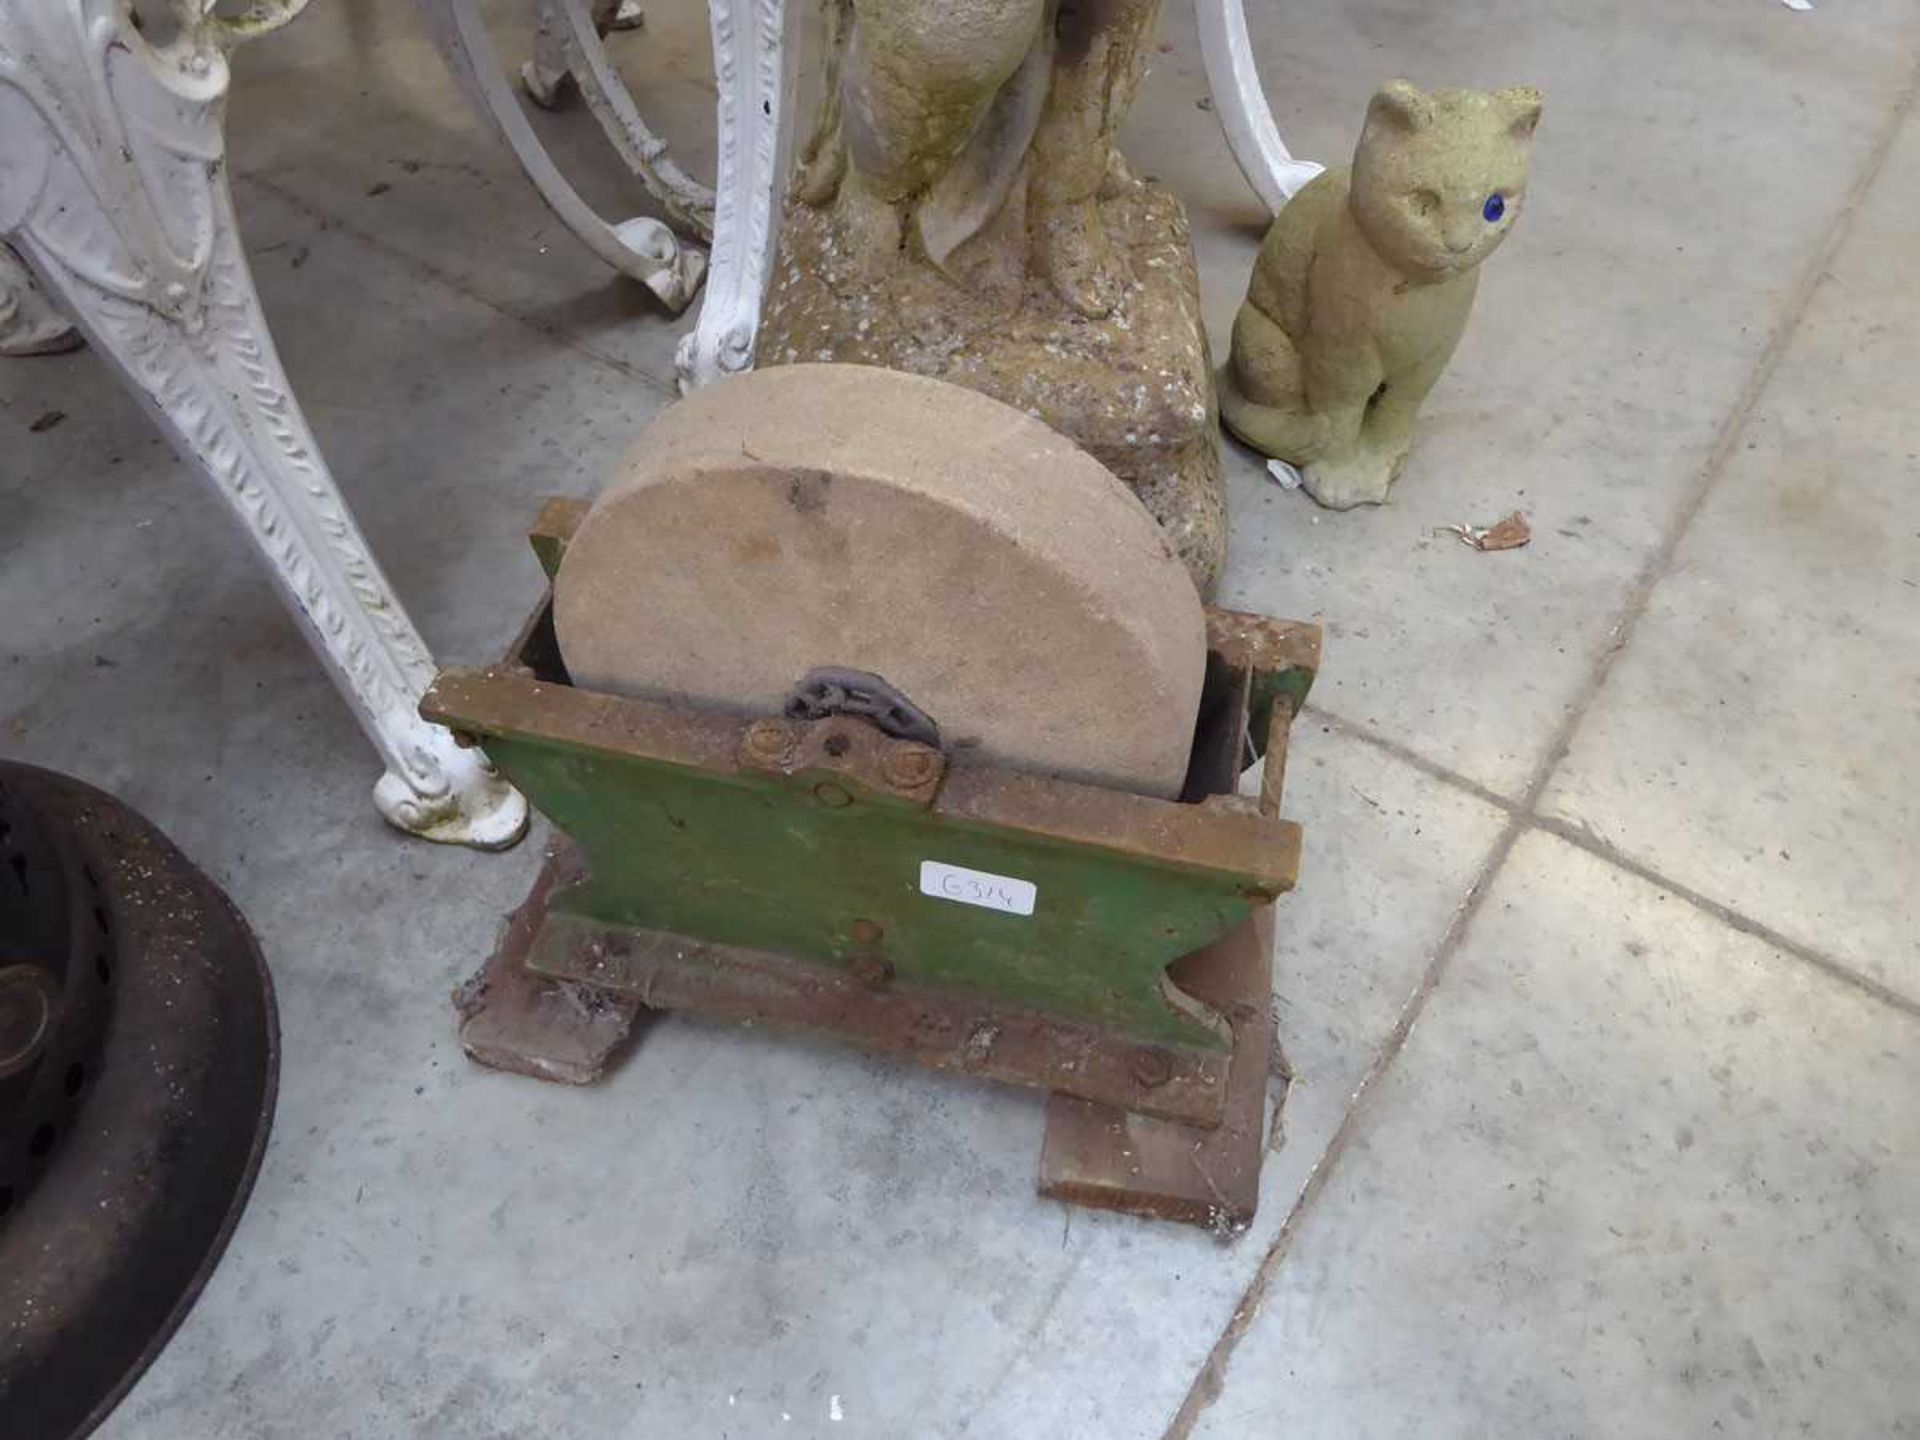 Concrete garden cherub together with small concrete cat and manual grinding wheel - Image 2 of 3